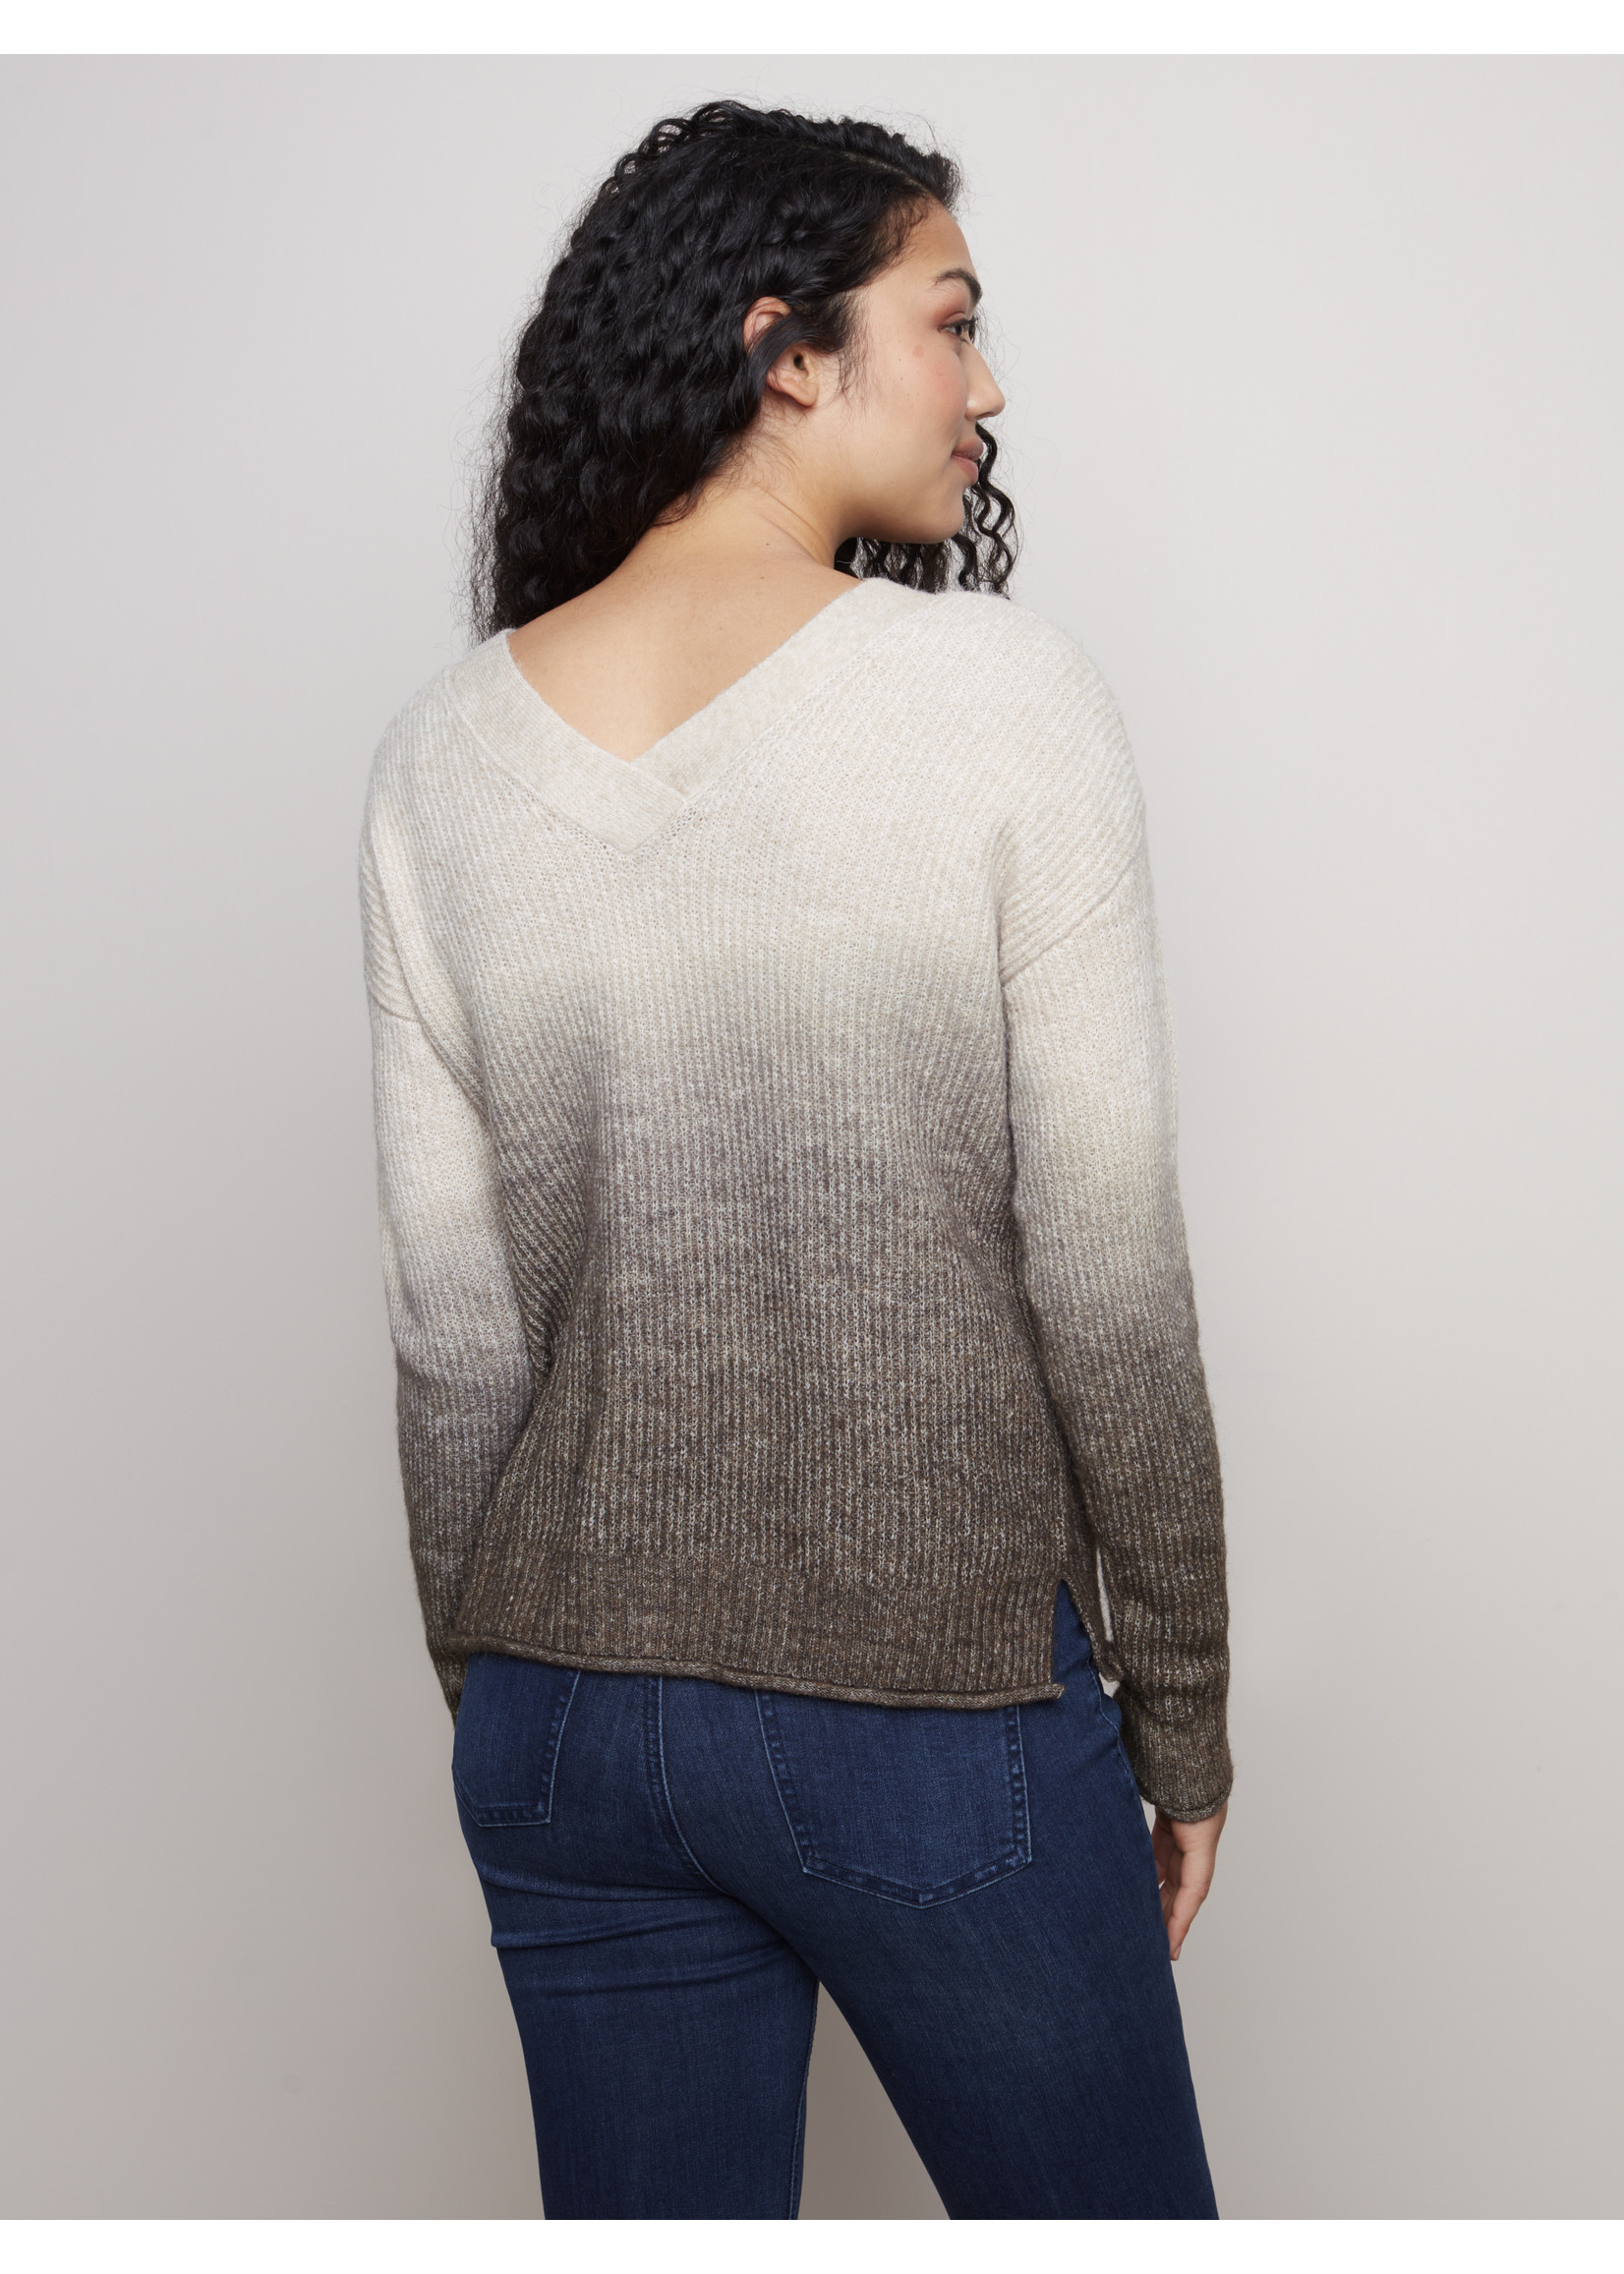 Charlie B Woodsy Ombre Cardigan